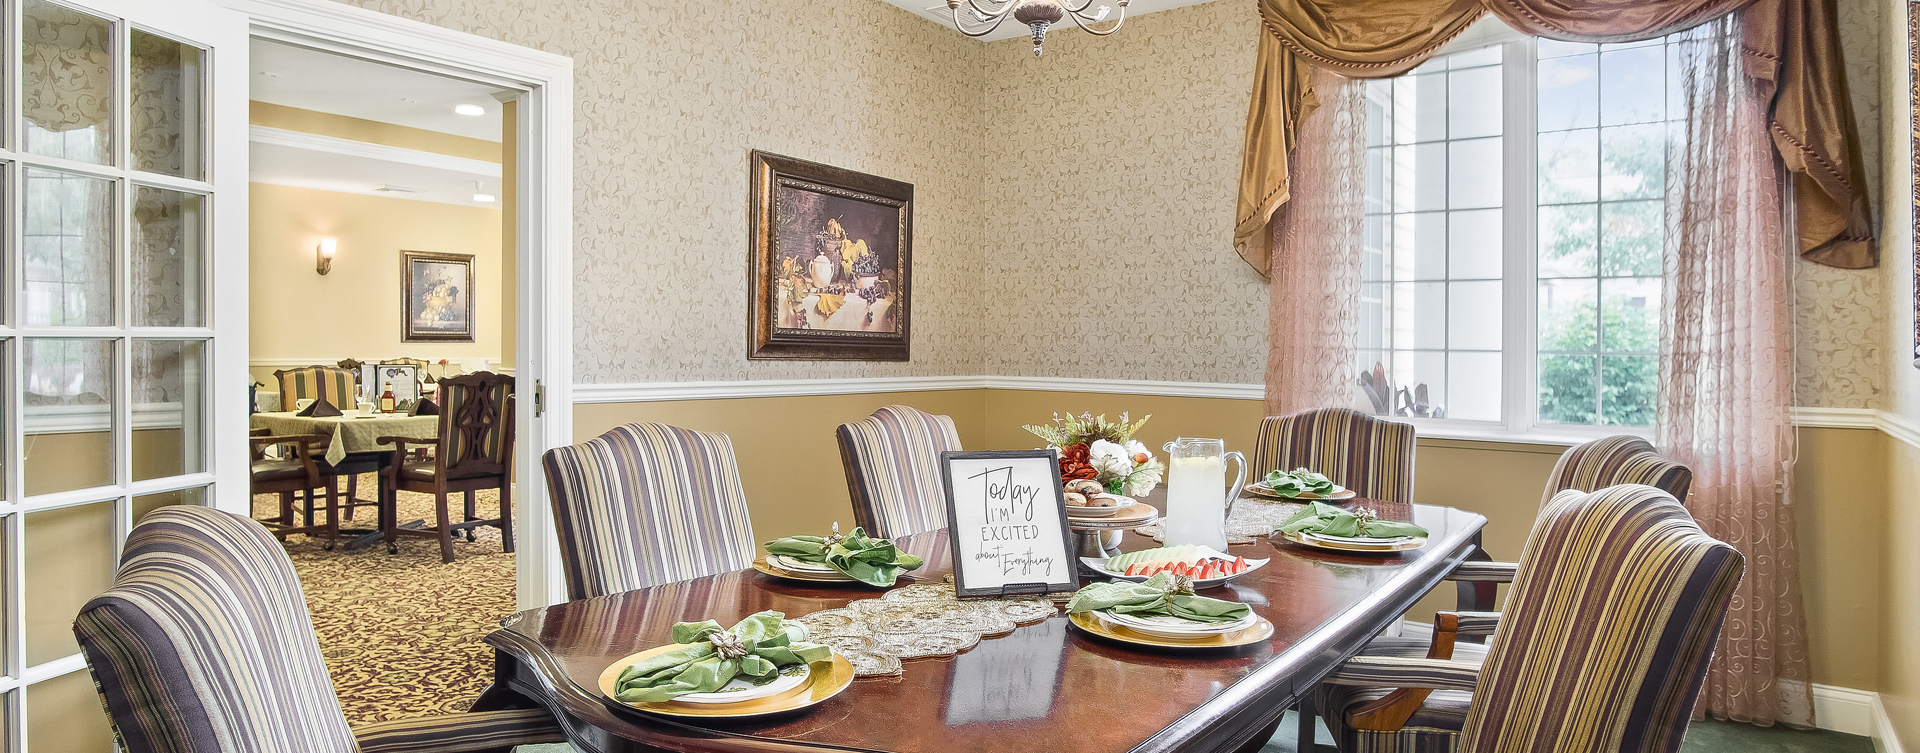 Celebrate special occasions in the private dining room at Bickford of Overland Park